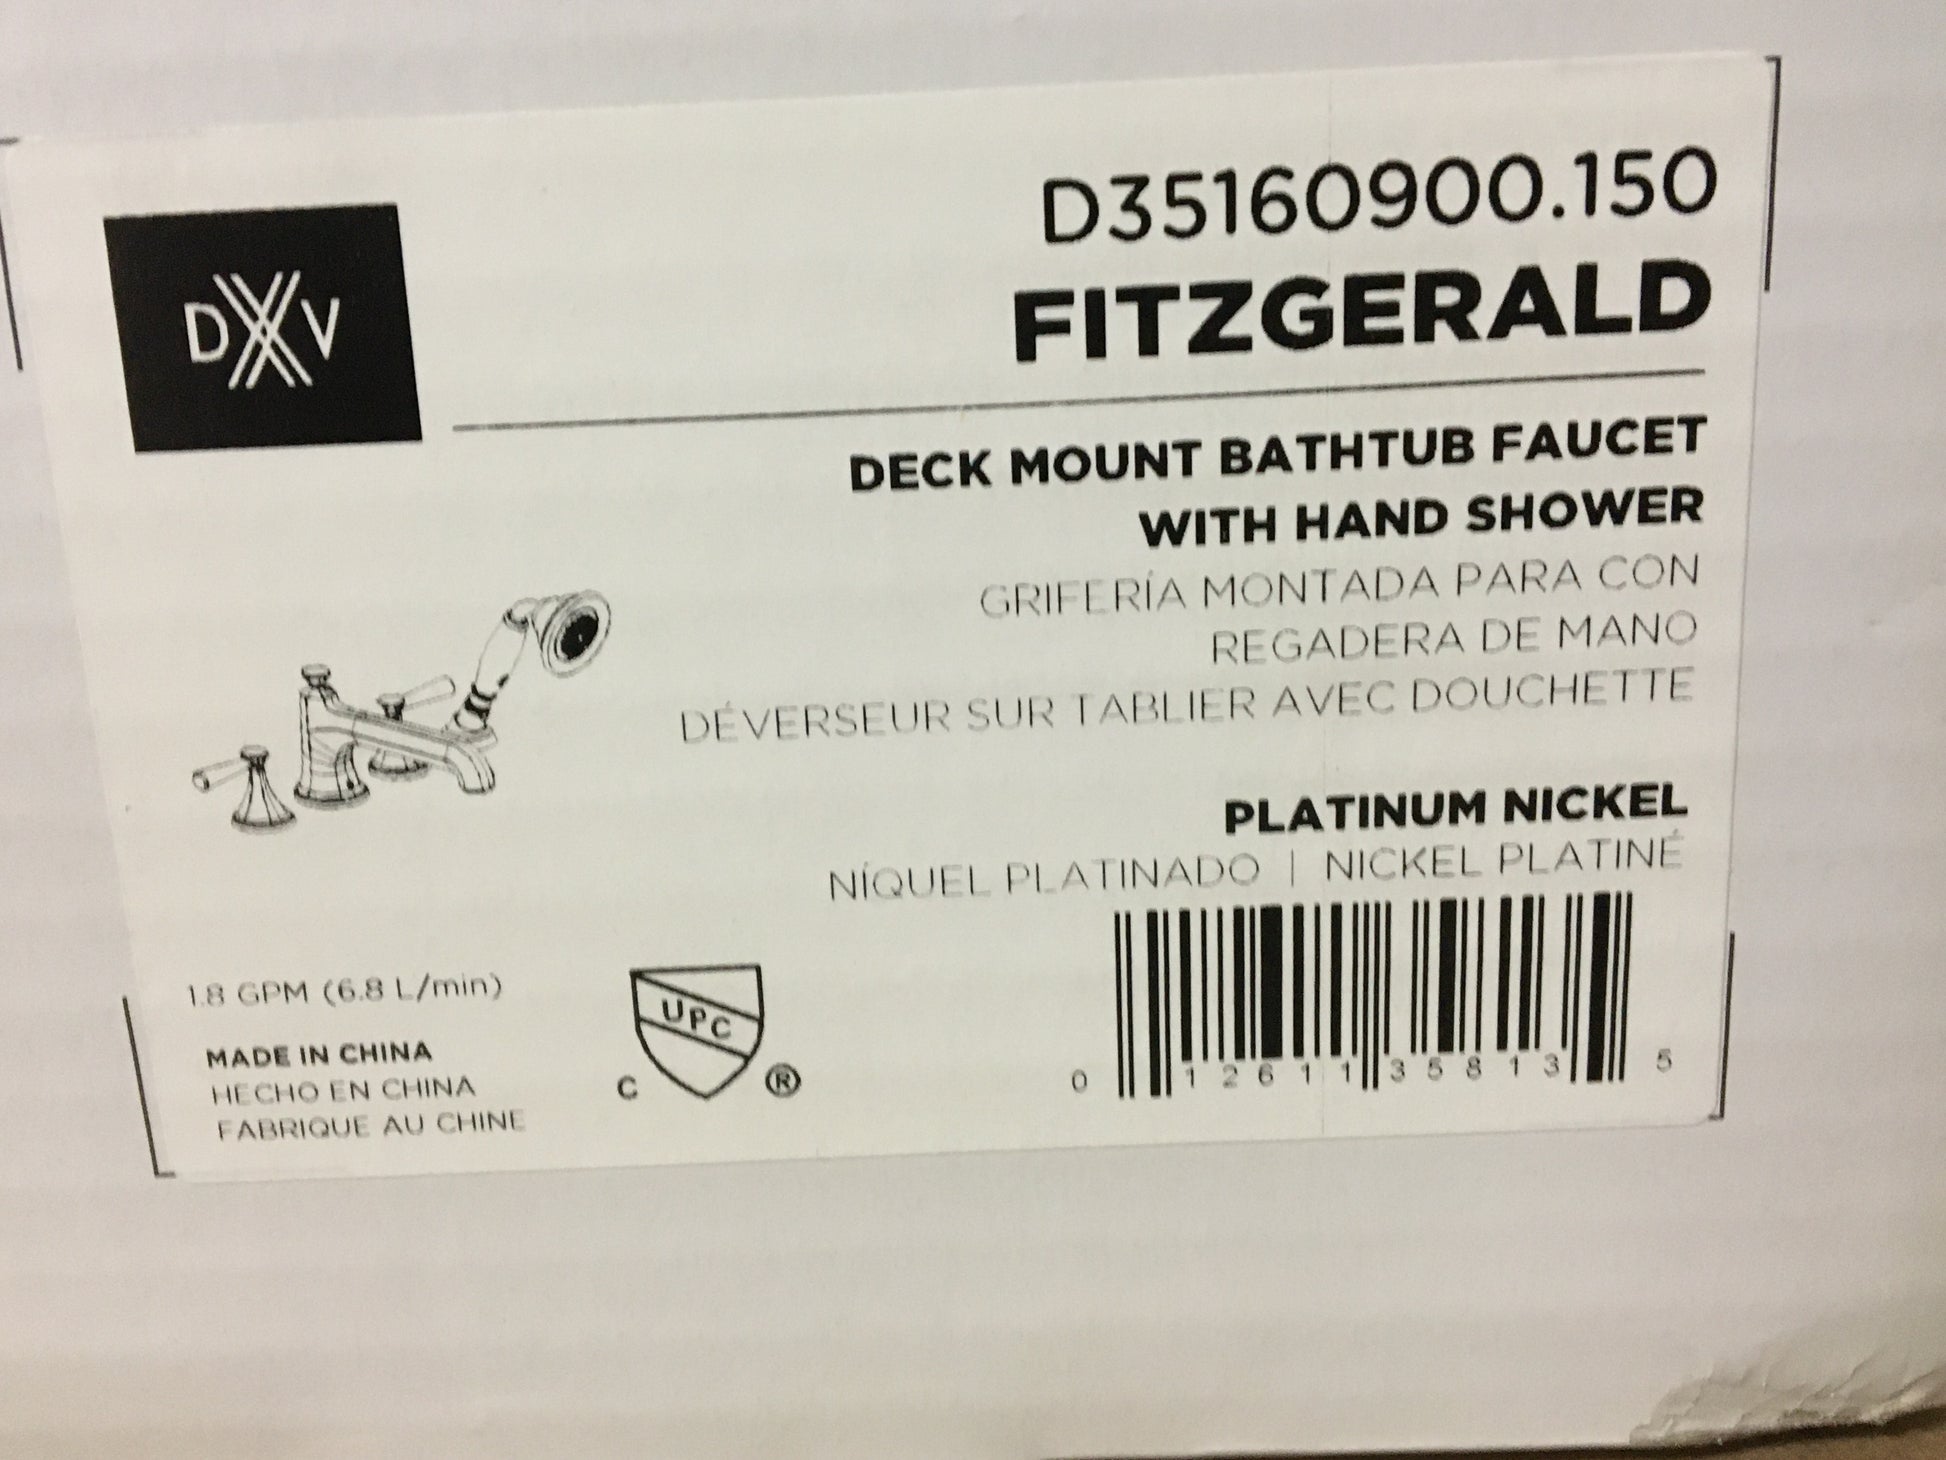 "FITZGERALD" 2-HANDLE DECK MOUNT BATHTUB FAUCET WITH HAND SHOWER AND LEVER HANDLES